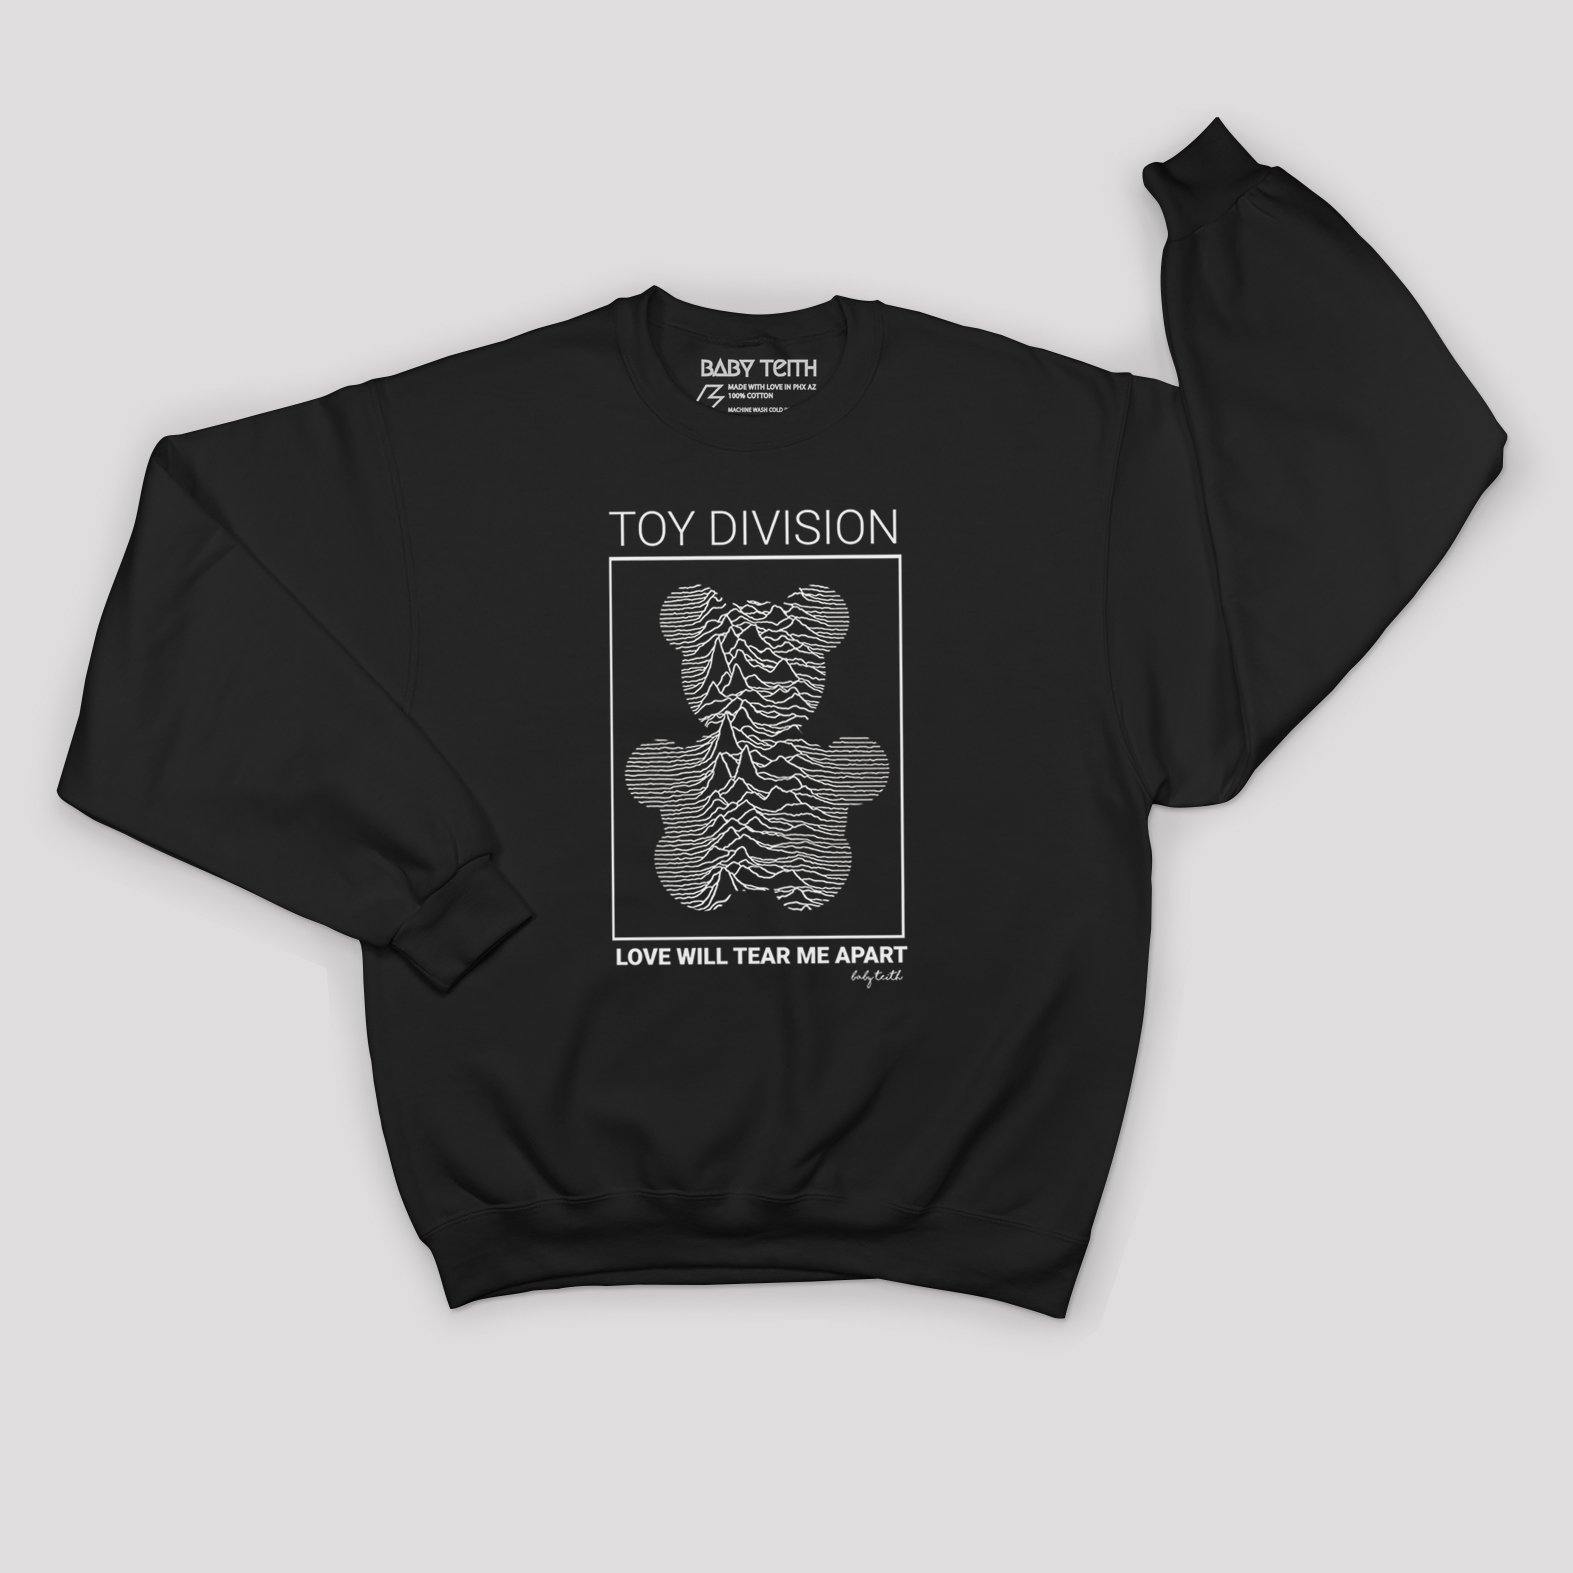 &quot;Toy Division&quot; Sweatshirt for Kids - Baby Teith